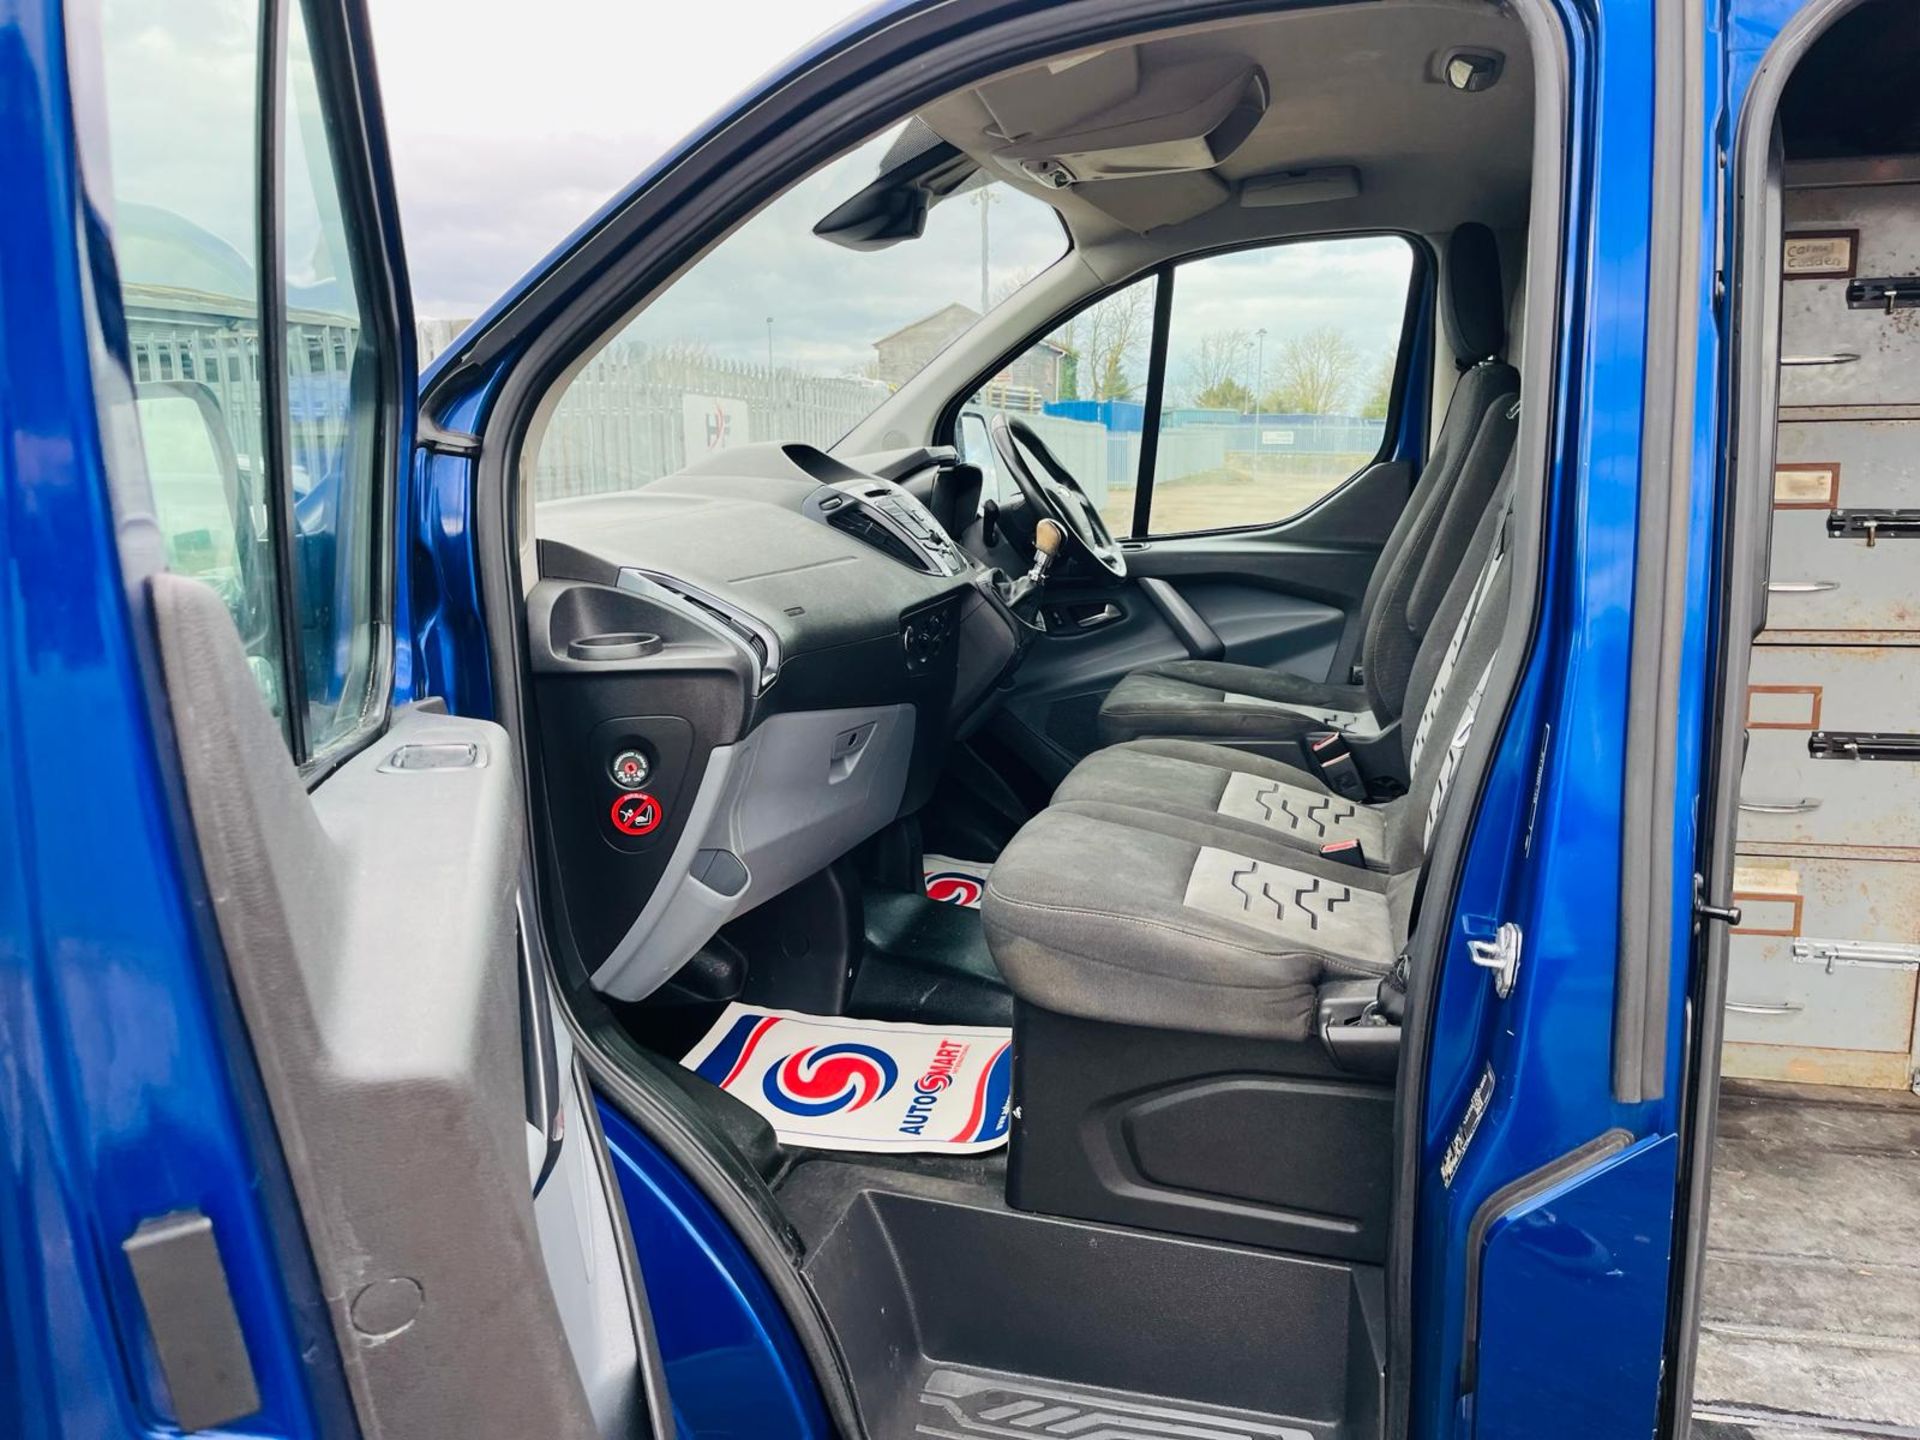 ** ON SALE ** Ford Transit Custom Limited 130 290 L3 H1 2.0 TDCI - ULEZ Compliant -Air Conditioning - Image 23 of 28